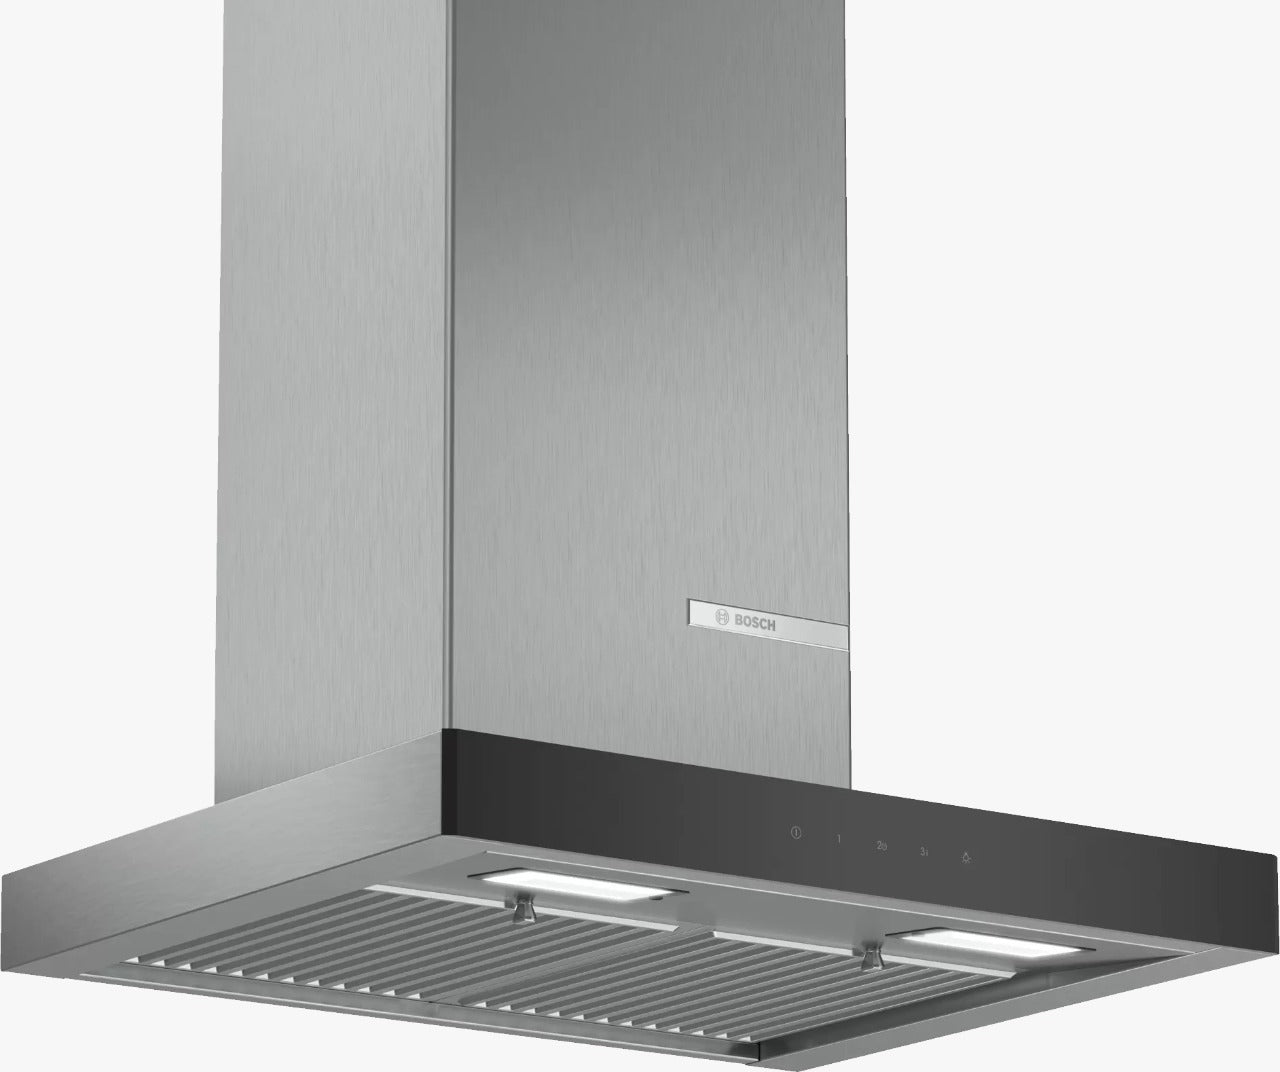 Bosch 4 wall-mounted cooker hood60 cm Stainless Steel DWB068G50I